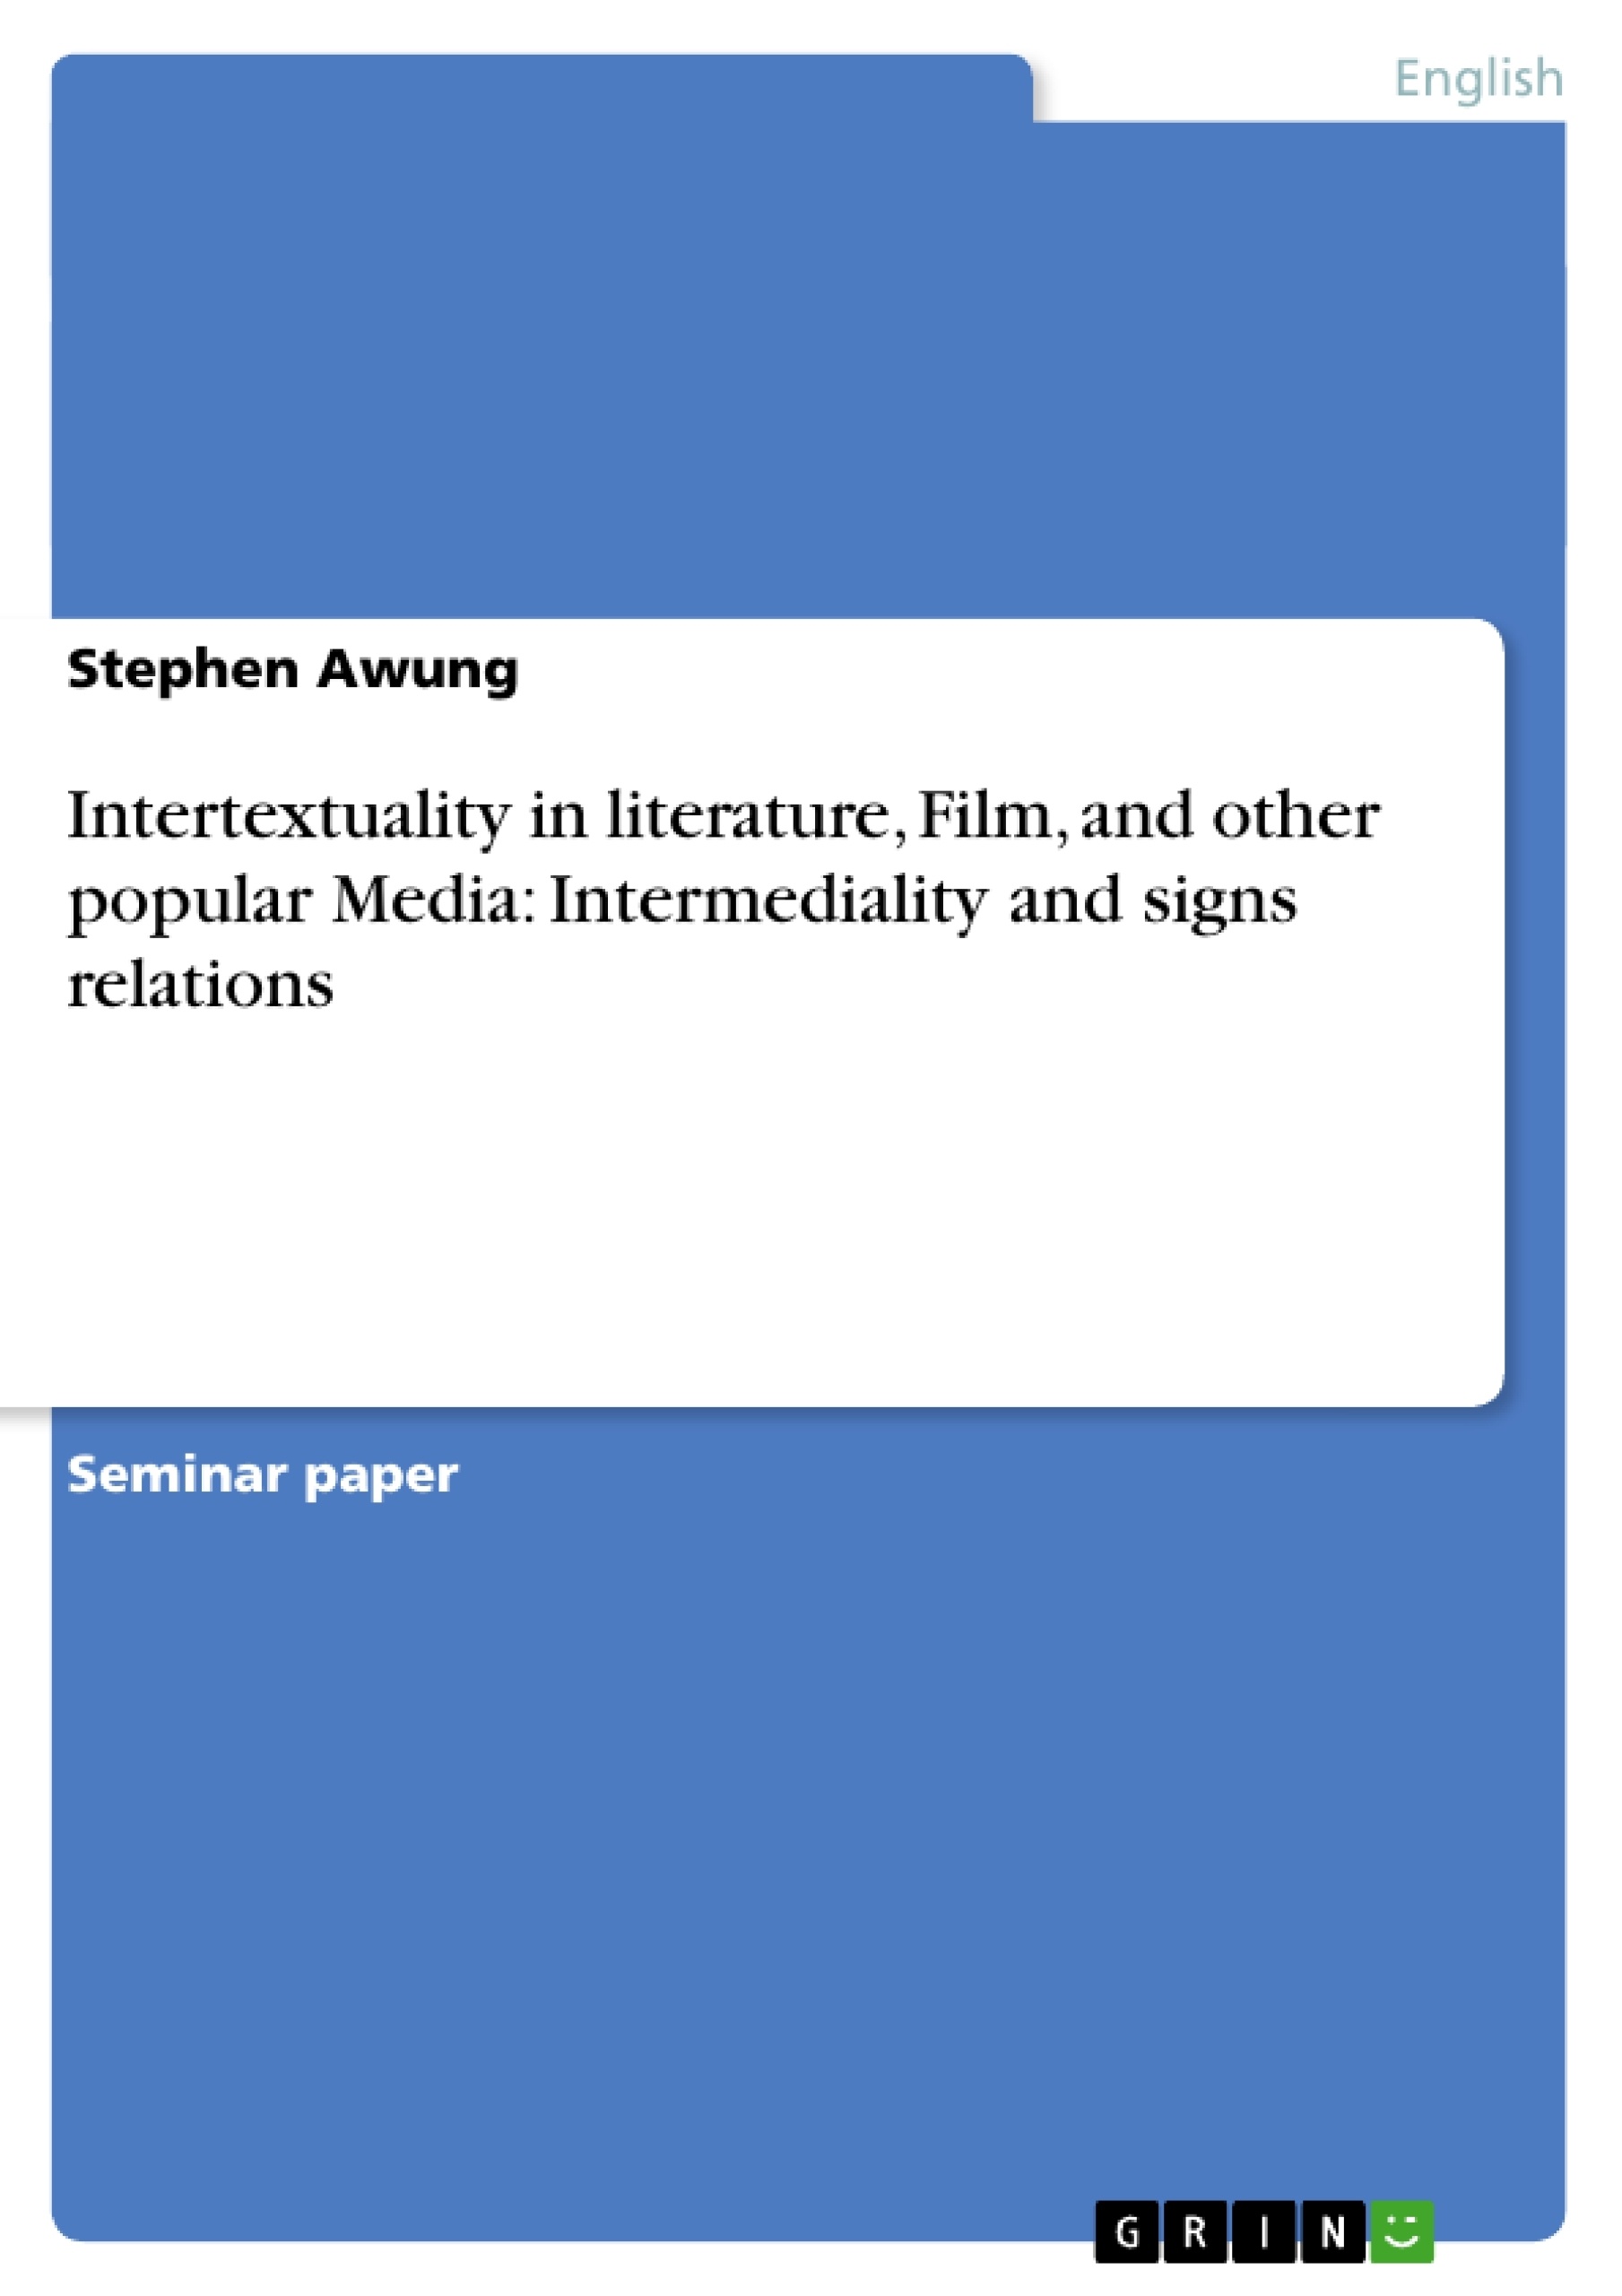 Título: Intertextuality in literature, Film, and other popular Media: Intermediality and signs relations